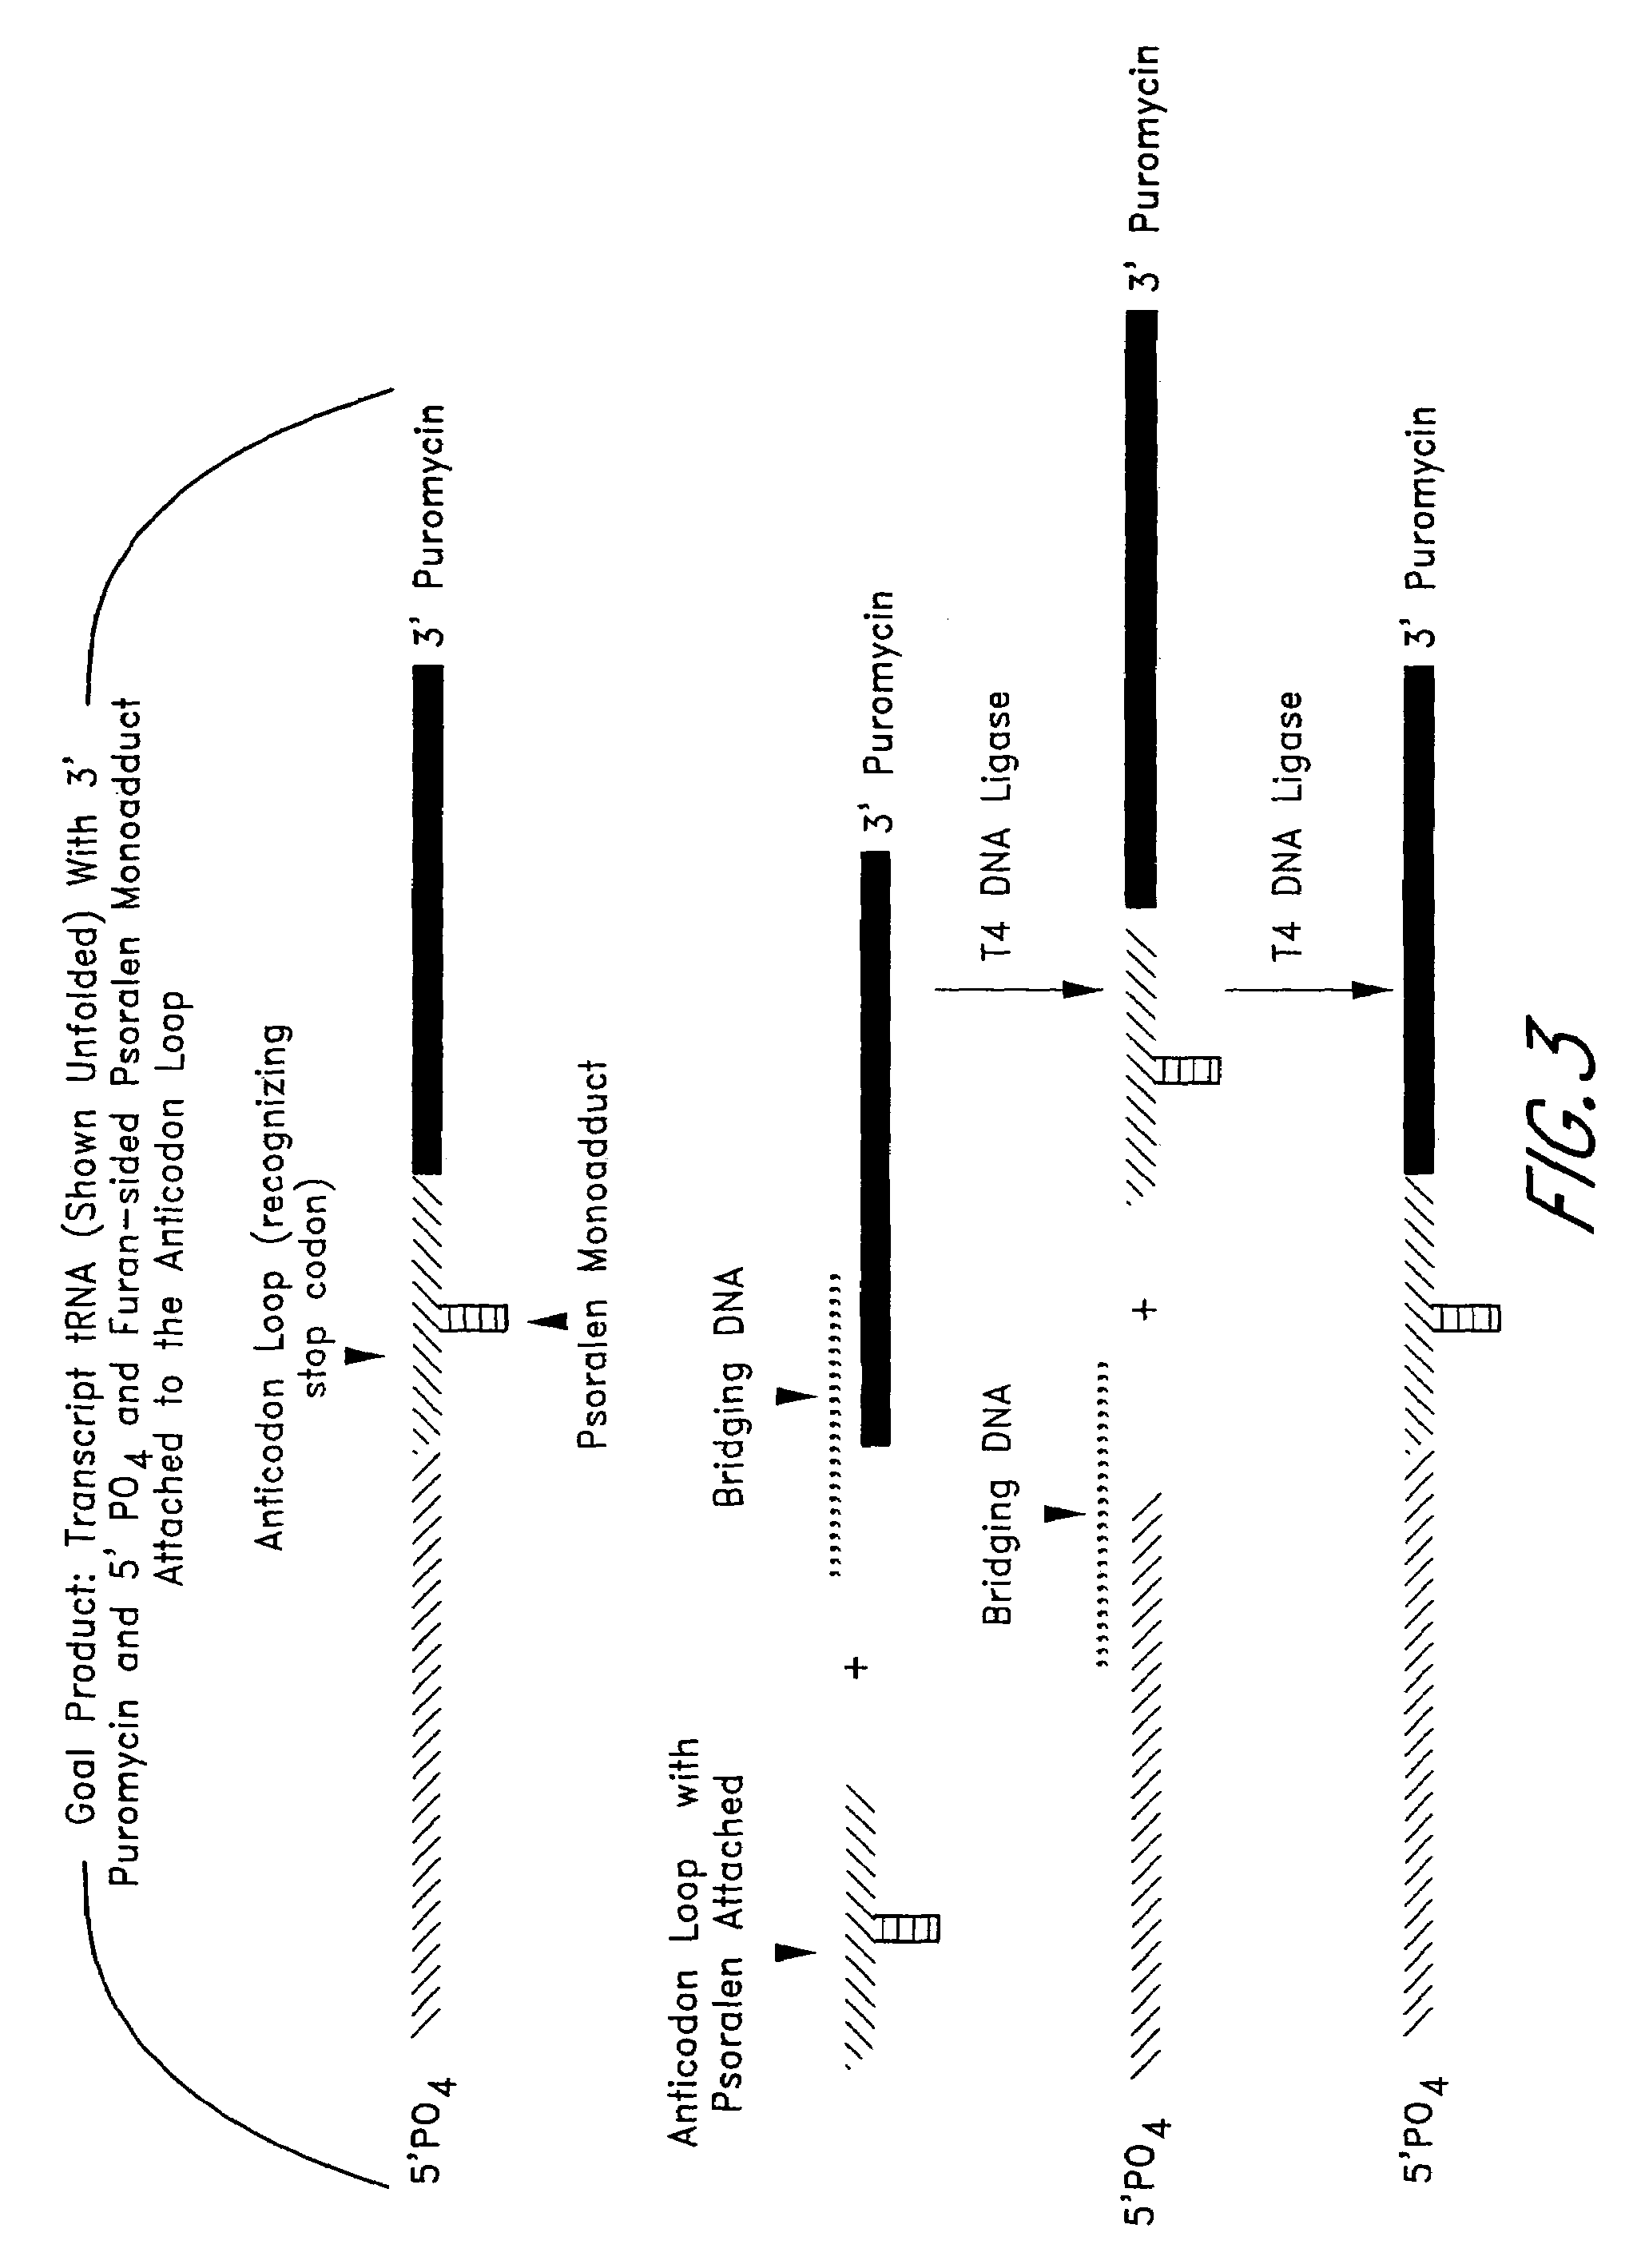 System for rapid identification and selection of nucleic acids and polypeptides, and method thereof